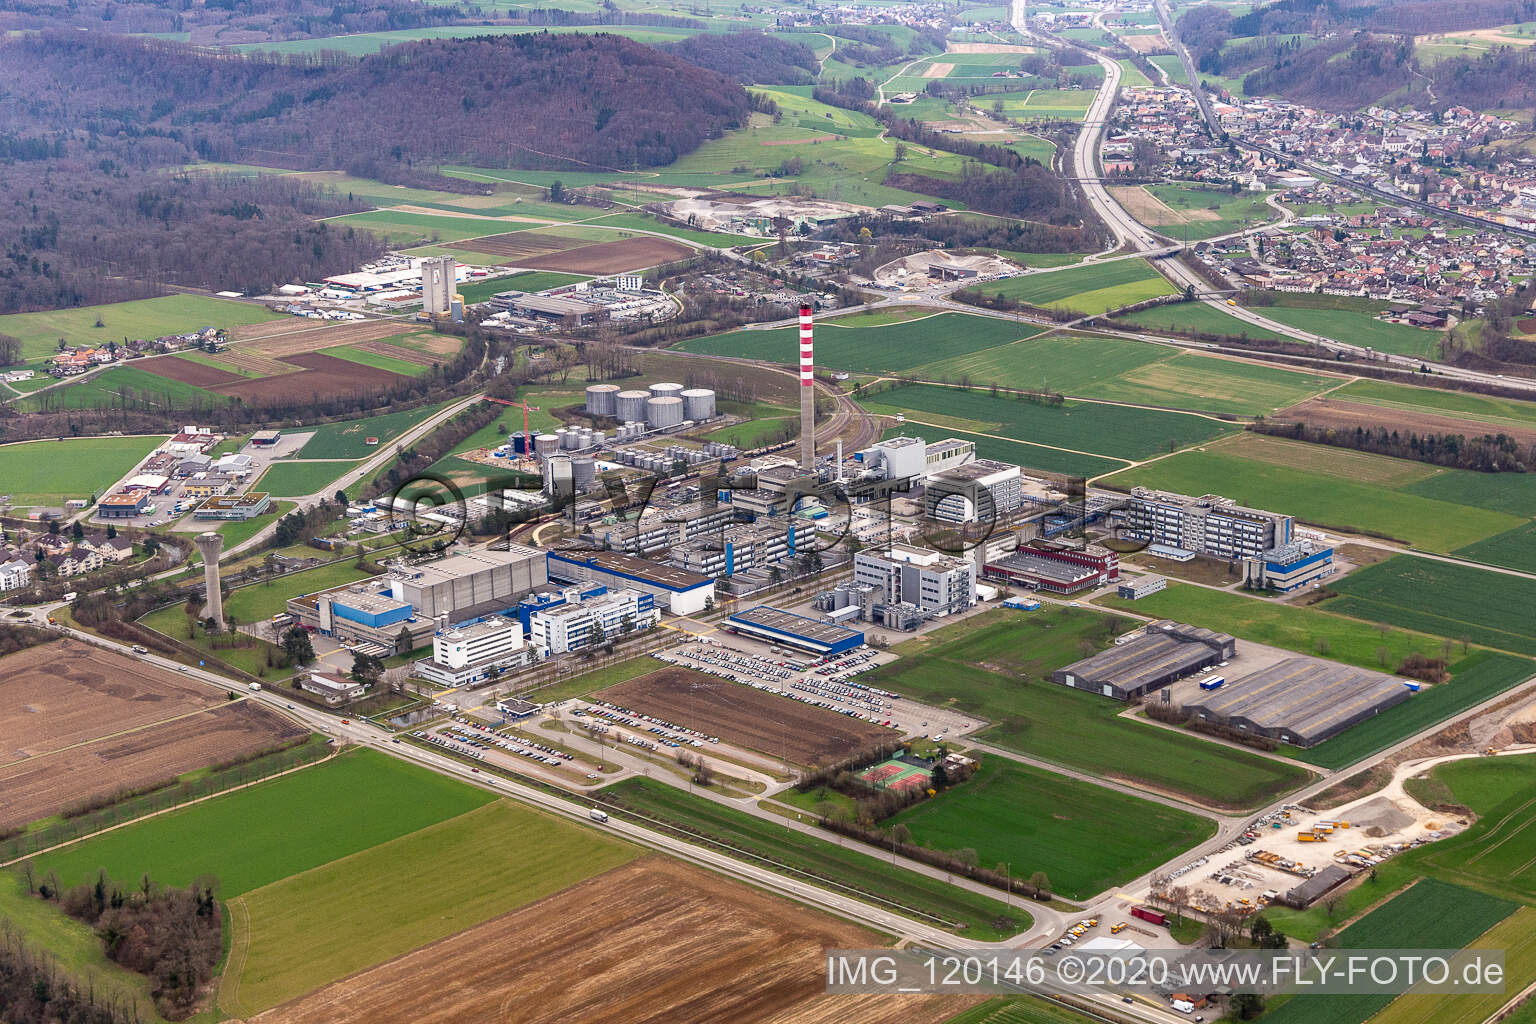 Company grounds and facilities of DSM Nutritional Products AG Zweigniederlassung factory Sisseln in Sisseln in the canton Aargau, Switzerland